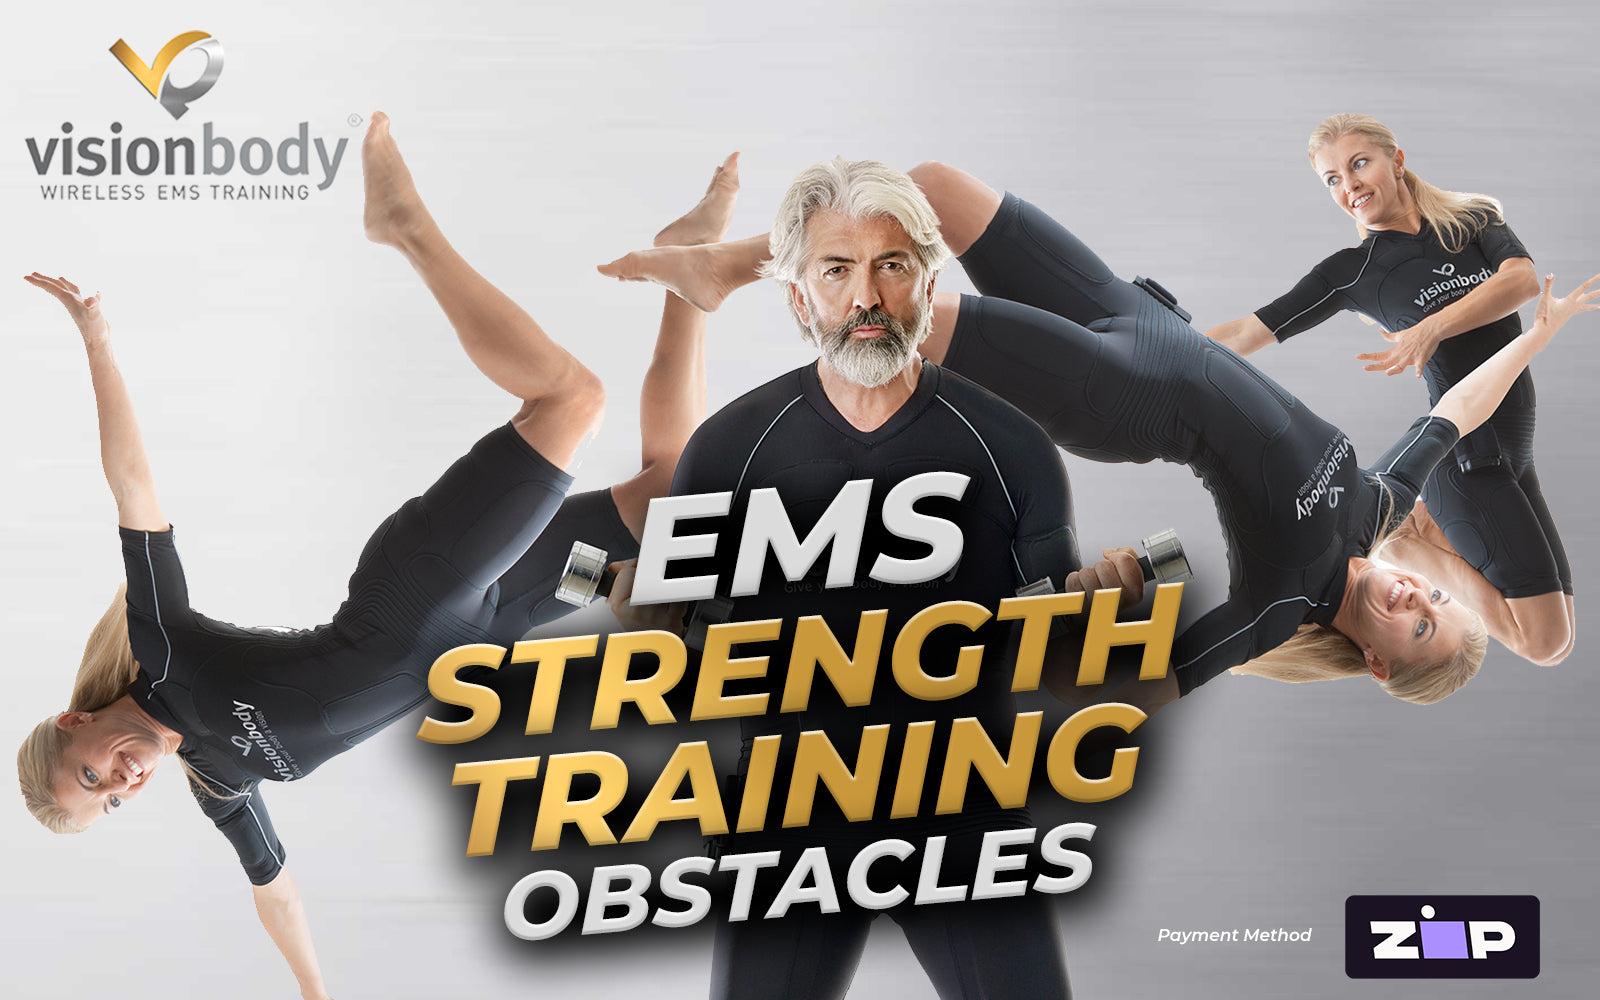 How will EMS training will help you overcome three major problems that come with regular strength training and help you burn fat and gain lean muscle.